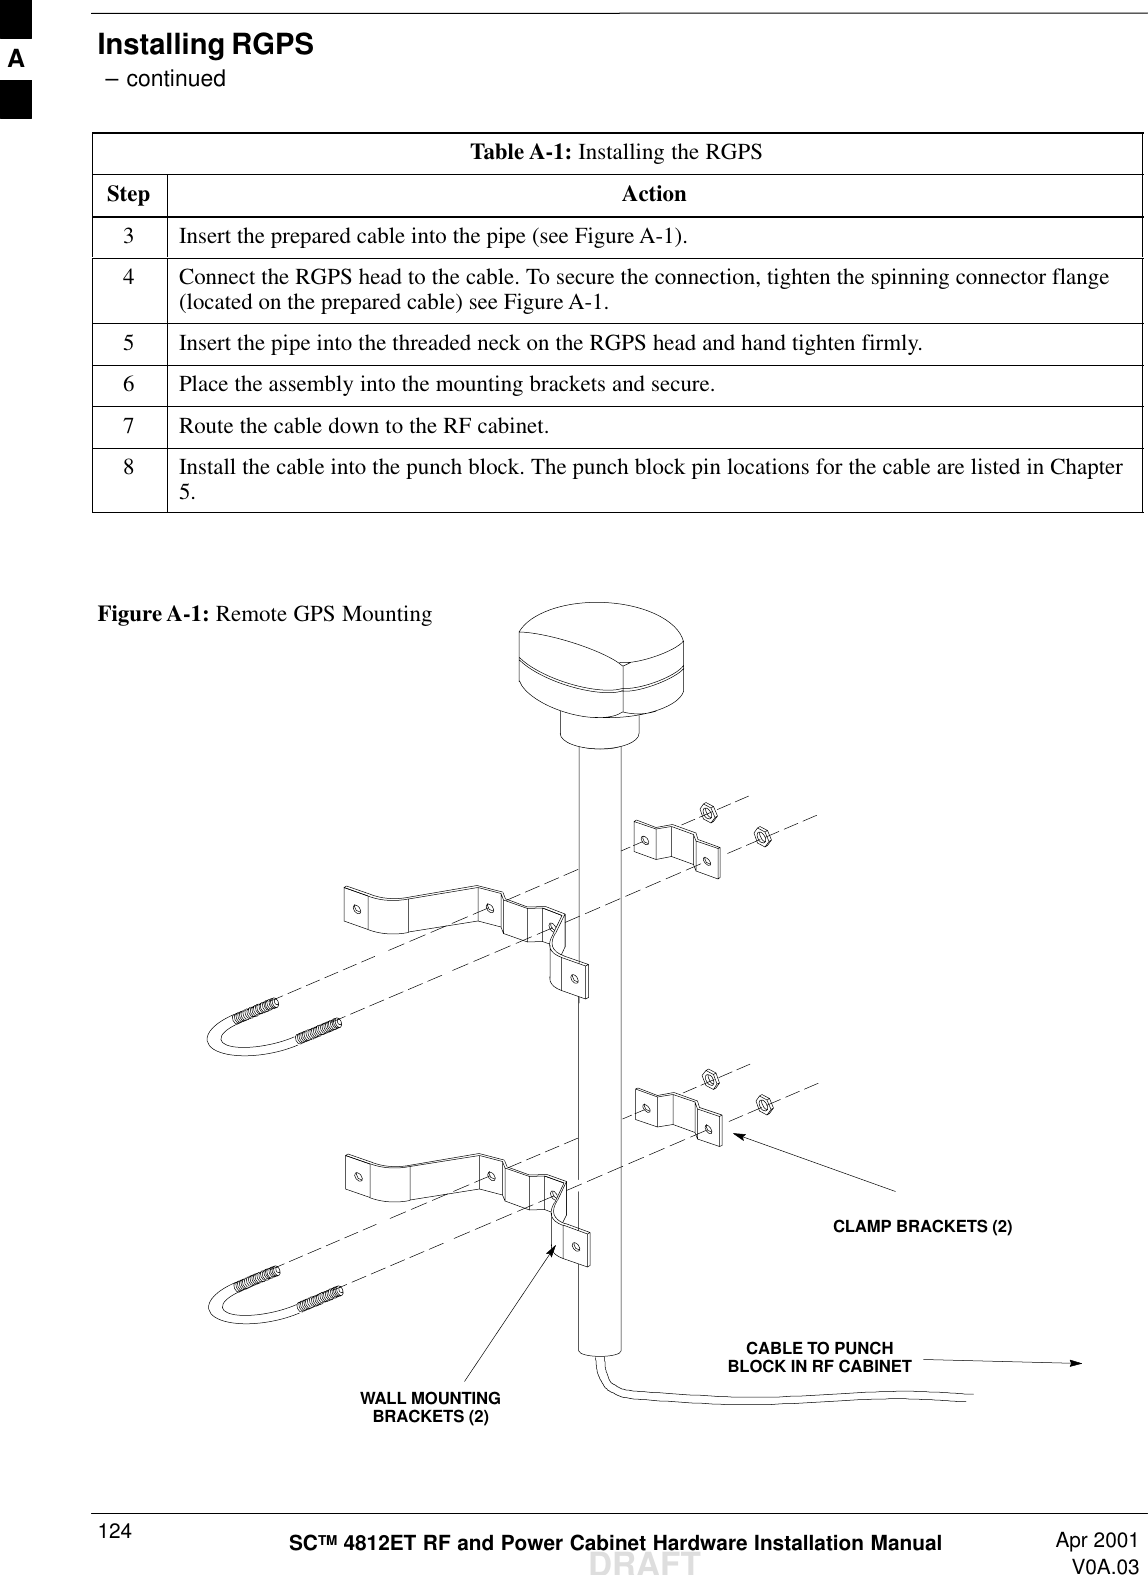 Installing RGPS – continuedDRAFTSCTM 4812ET RF and Power Cabinet Hardware Installation Manual Apr 2001V0A.03124Table A-1: Installing the RGPSStep Action3Insert the prepared cable into the pipe (see Figure A-1).4Connect the RGPS head to the cable. To secure the connection, tighten the spinning connector flange(located on the prepared cable) see Figure A-1.5Insert the pipe into the threaded neck on the RGPS head and hand tighten firmly.6Place the assembly into the mounting brackets and secure.7Route the cable down to the RF cabinet.8Install the cable into the punch block. The punch block pin locations for the cable are listed in Chapter5. Figure A-1: Remote GPS MountingCABLE TO PUNCHBLOCK IN RF CABINETWALL MOUNTINGBRACKETS (2)CLAMP BRACKETS (2)A